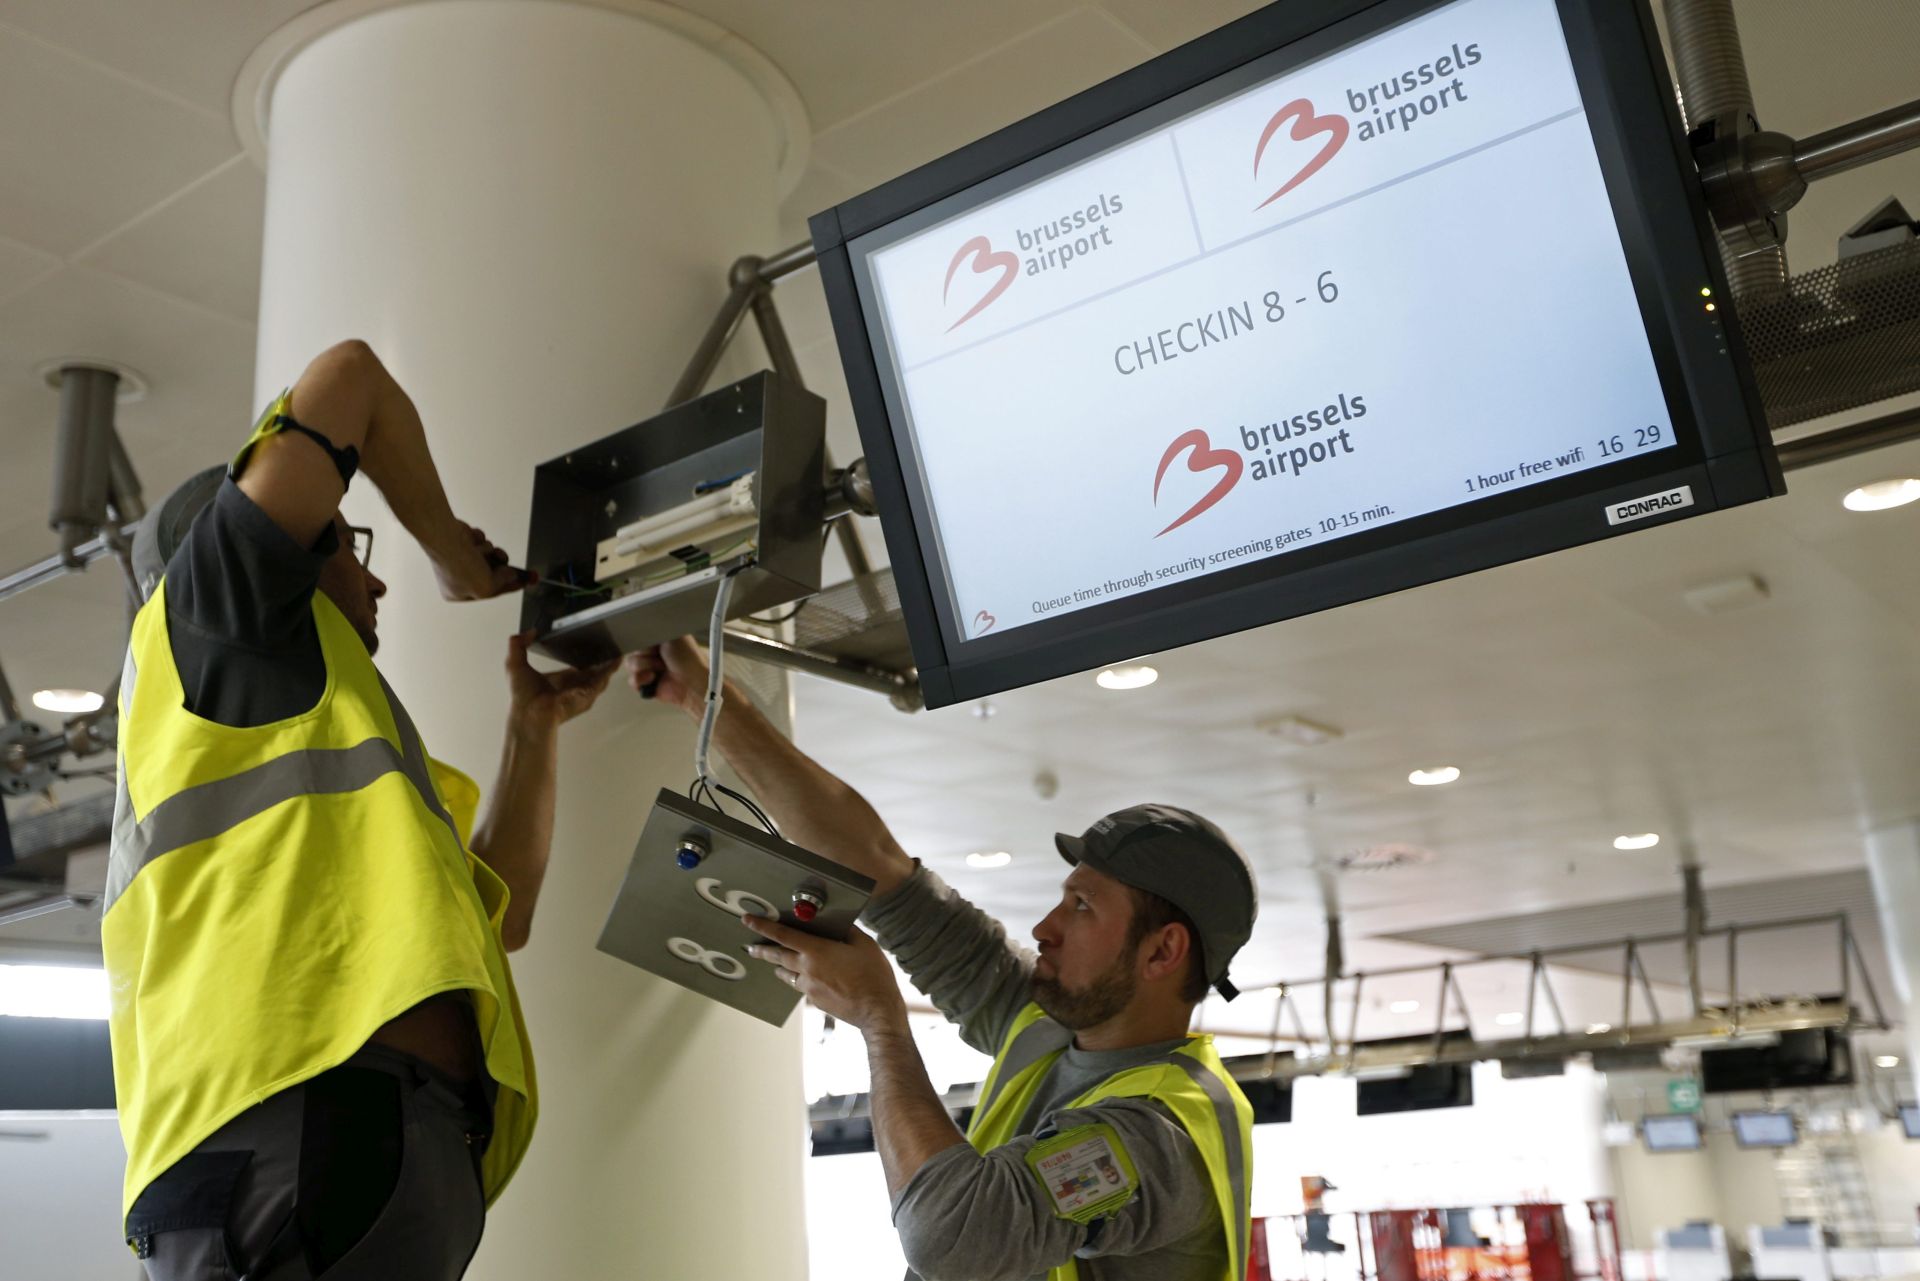 epa05272538 Workers repair a screen as a Parliamentary Committee investigating the Brussels attacks visits the Zaventem airport in Brussels, Belgium, 22 April 2016. At least 31 people were killed and hundreds injured on 22 March 2016 in bomb explosions at the departures hall of the airport and at Metro stations in downtown Brussels. Militants of the terrorist militia refering to itself as Islamic State (IS) have claimed responsibility for the attacks.  EPA/FRANCOIS LENOIR / POOL